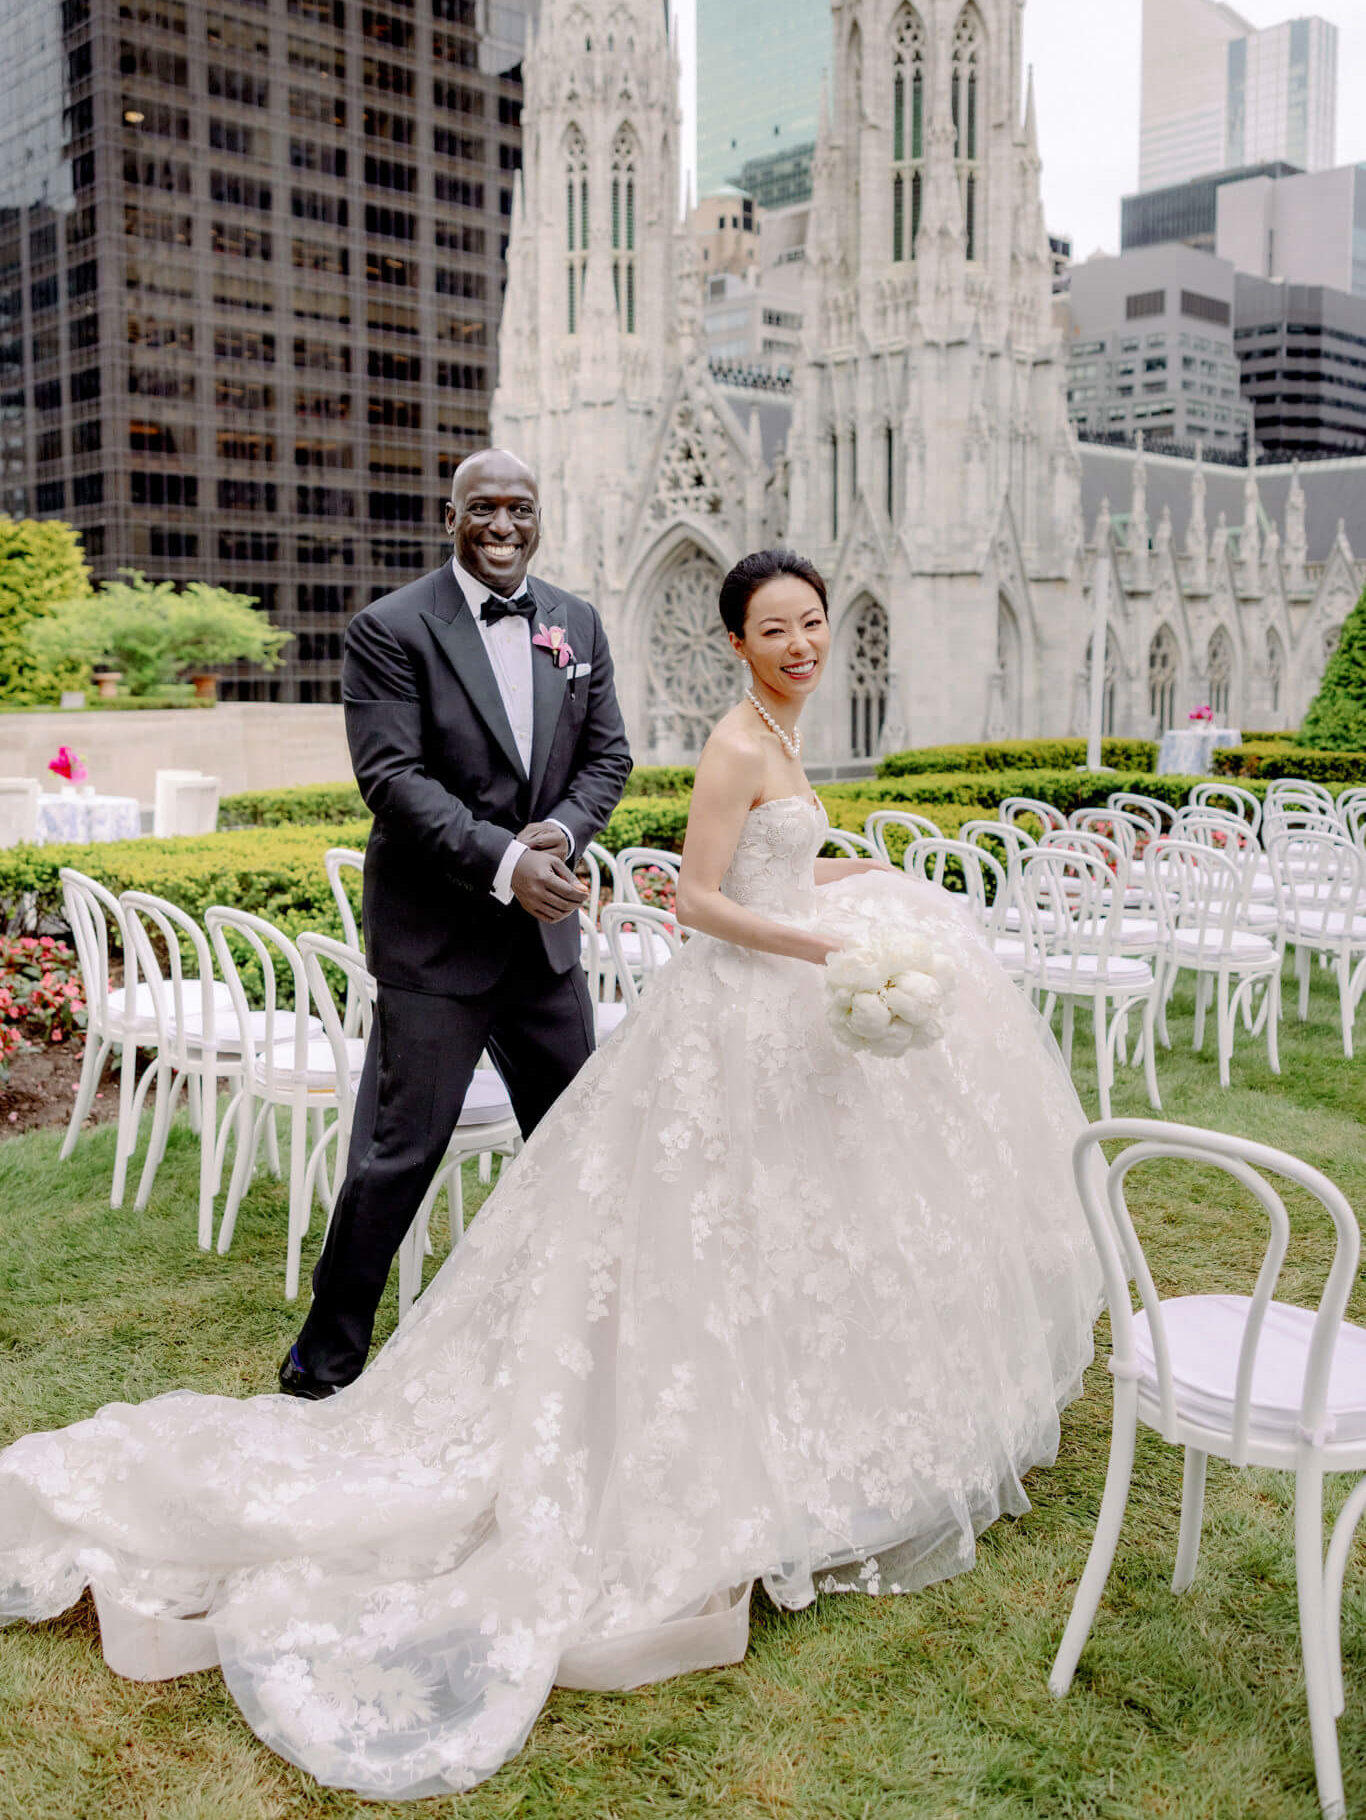 The bride and groom are smiling happily at 620 Loft and Garden with St. Patrick's Cathedral in the Background. Image by Jenny Fu Studio